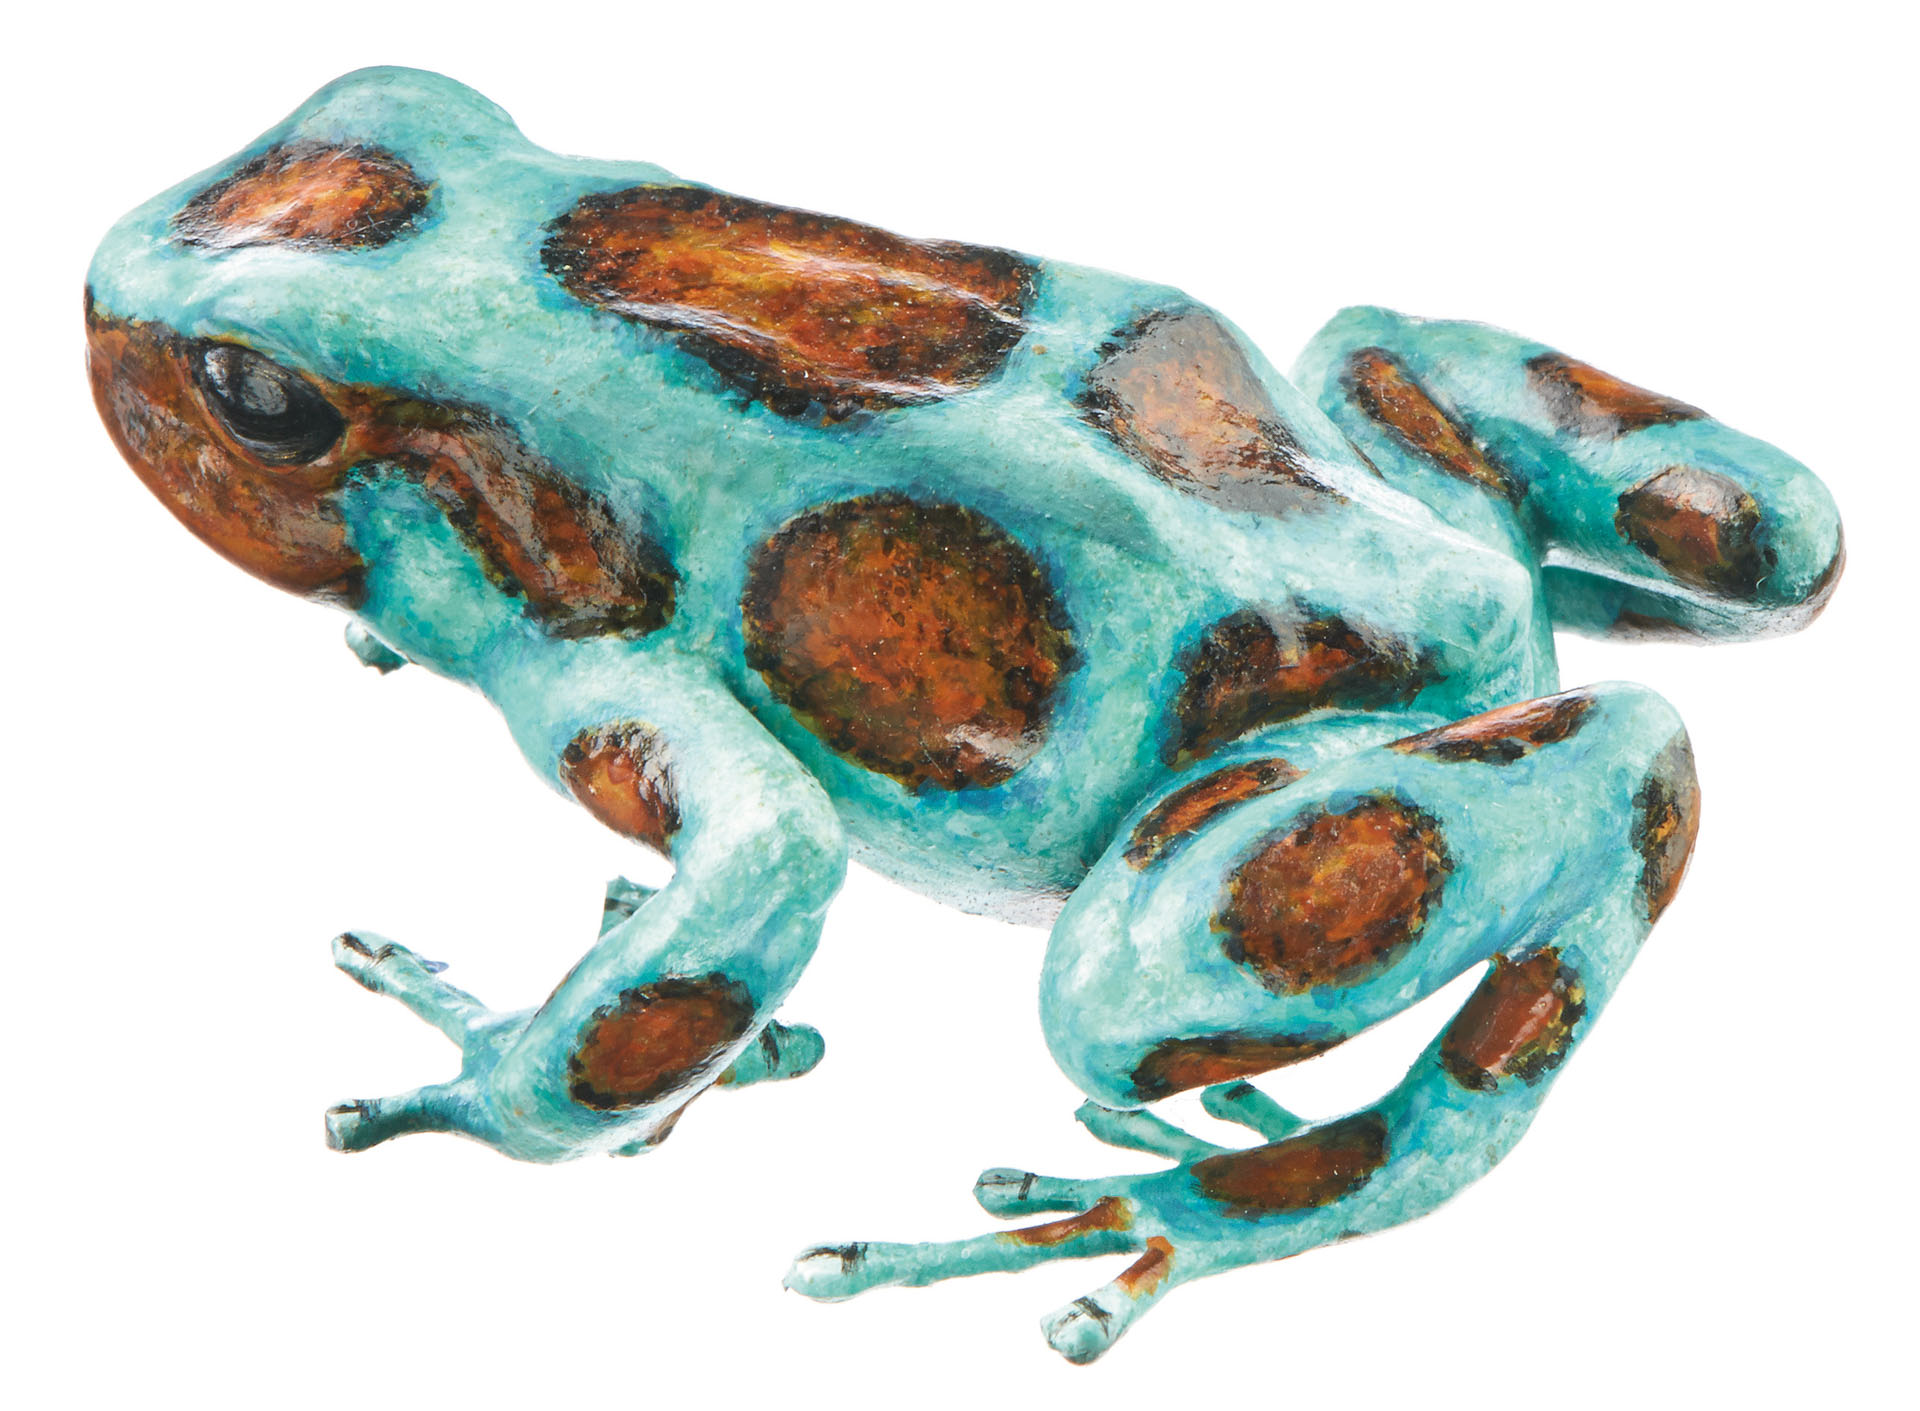 Green and Black Poison Dart Frog “Bronze” Turquoise and Bronze-Brown, Female